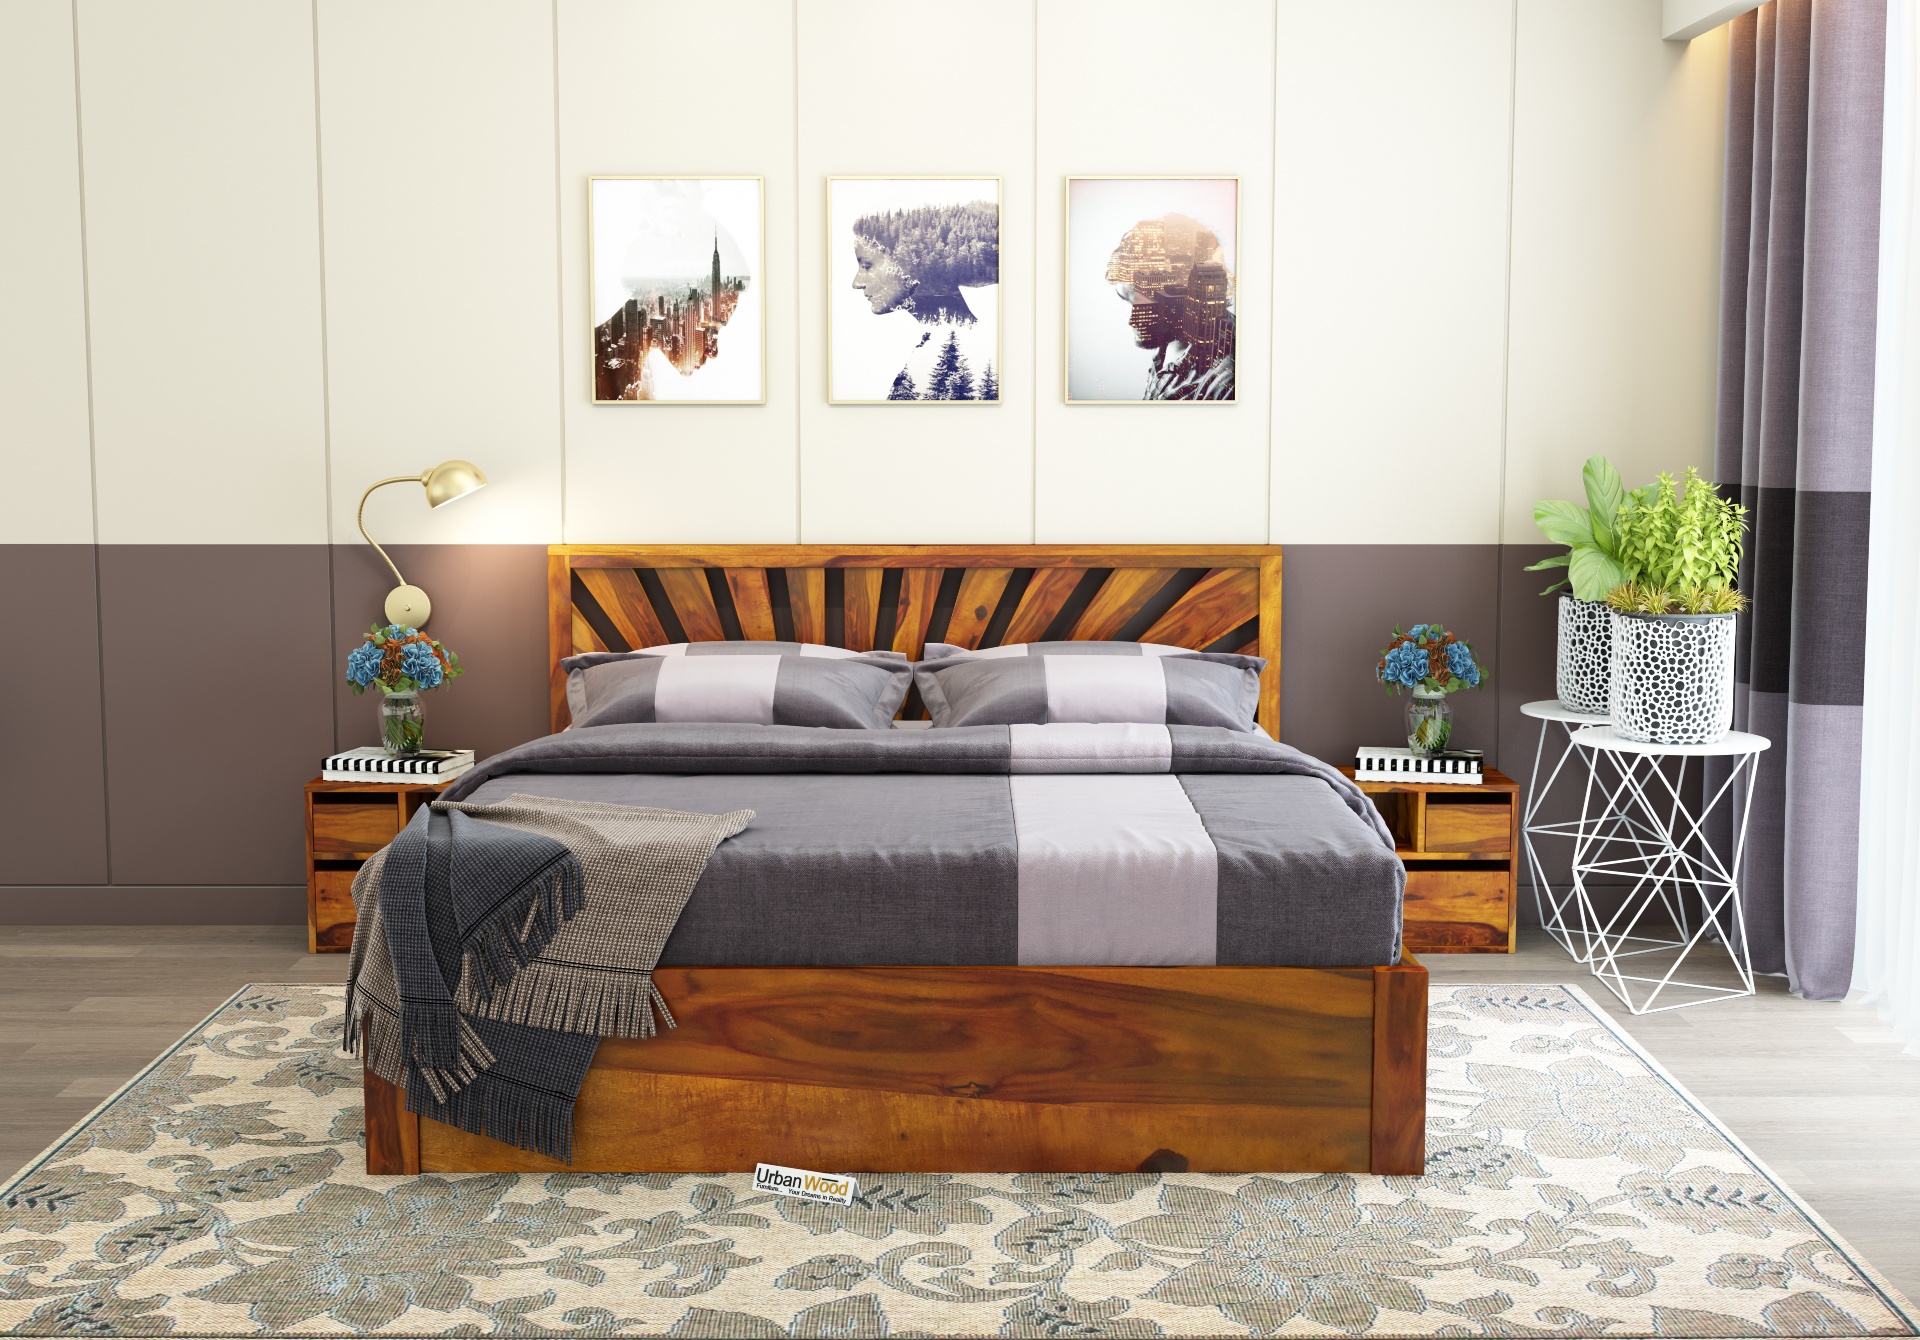 Jerry Wooden Hydraulic Bed Queen Size (Honey Finish)